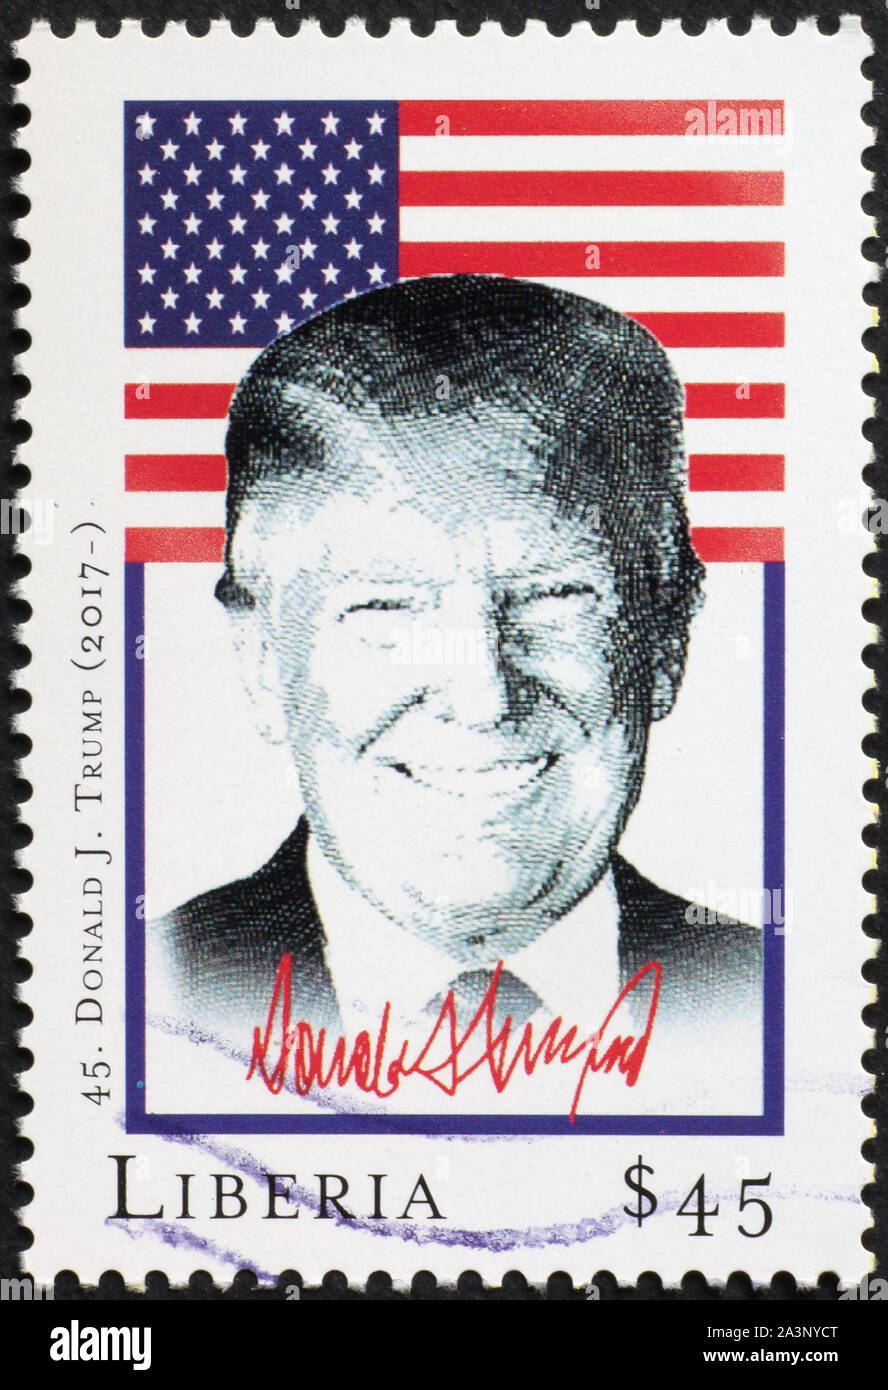 President Donald Trump and flag on postage stamp Stock Photo